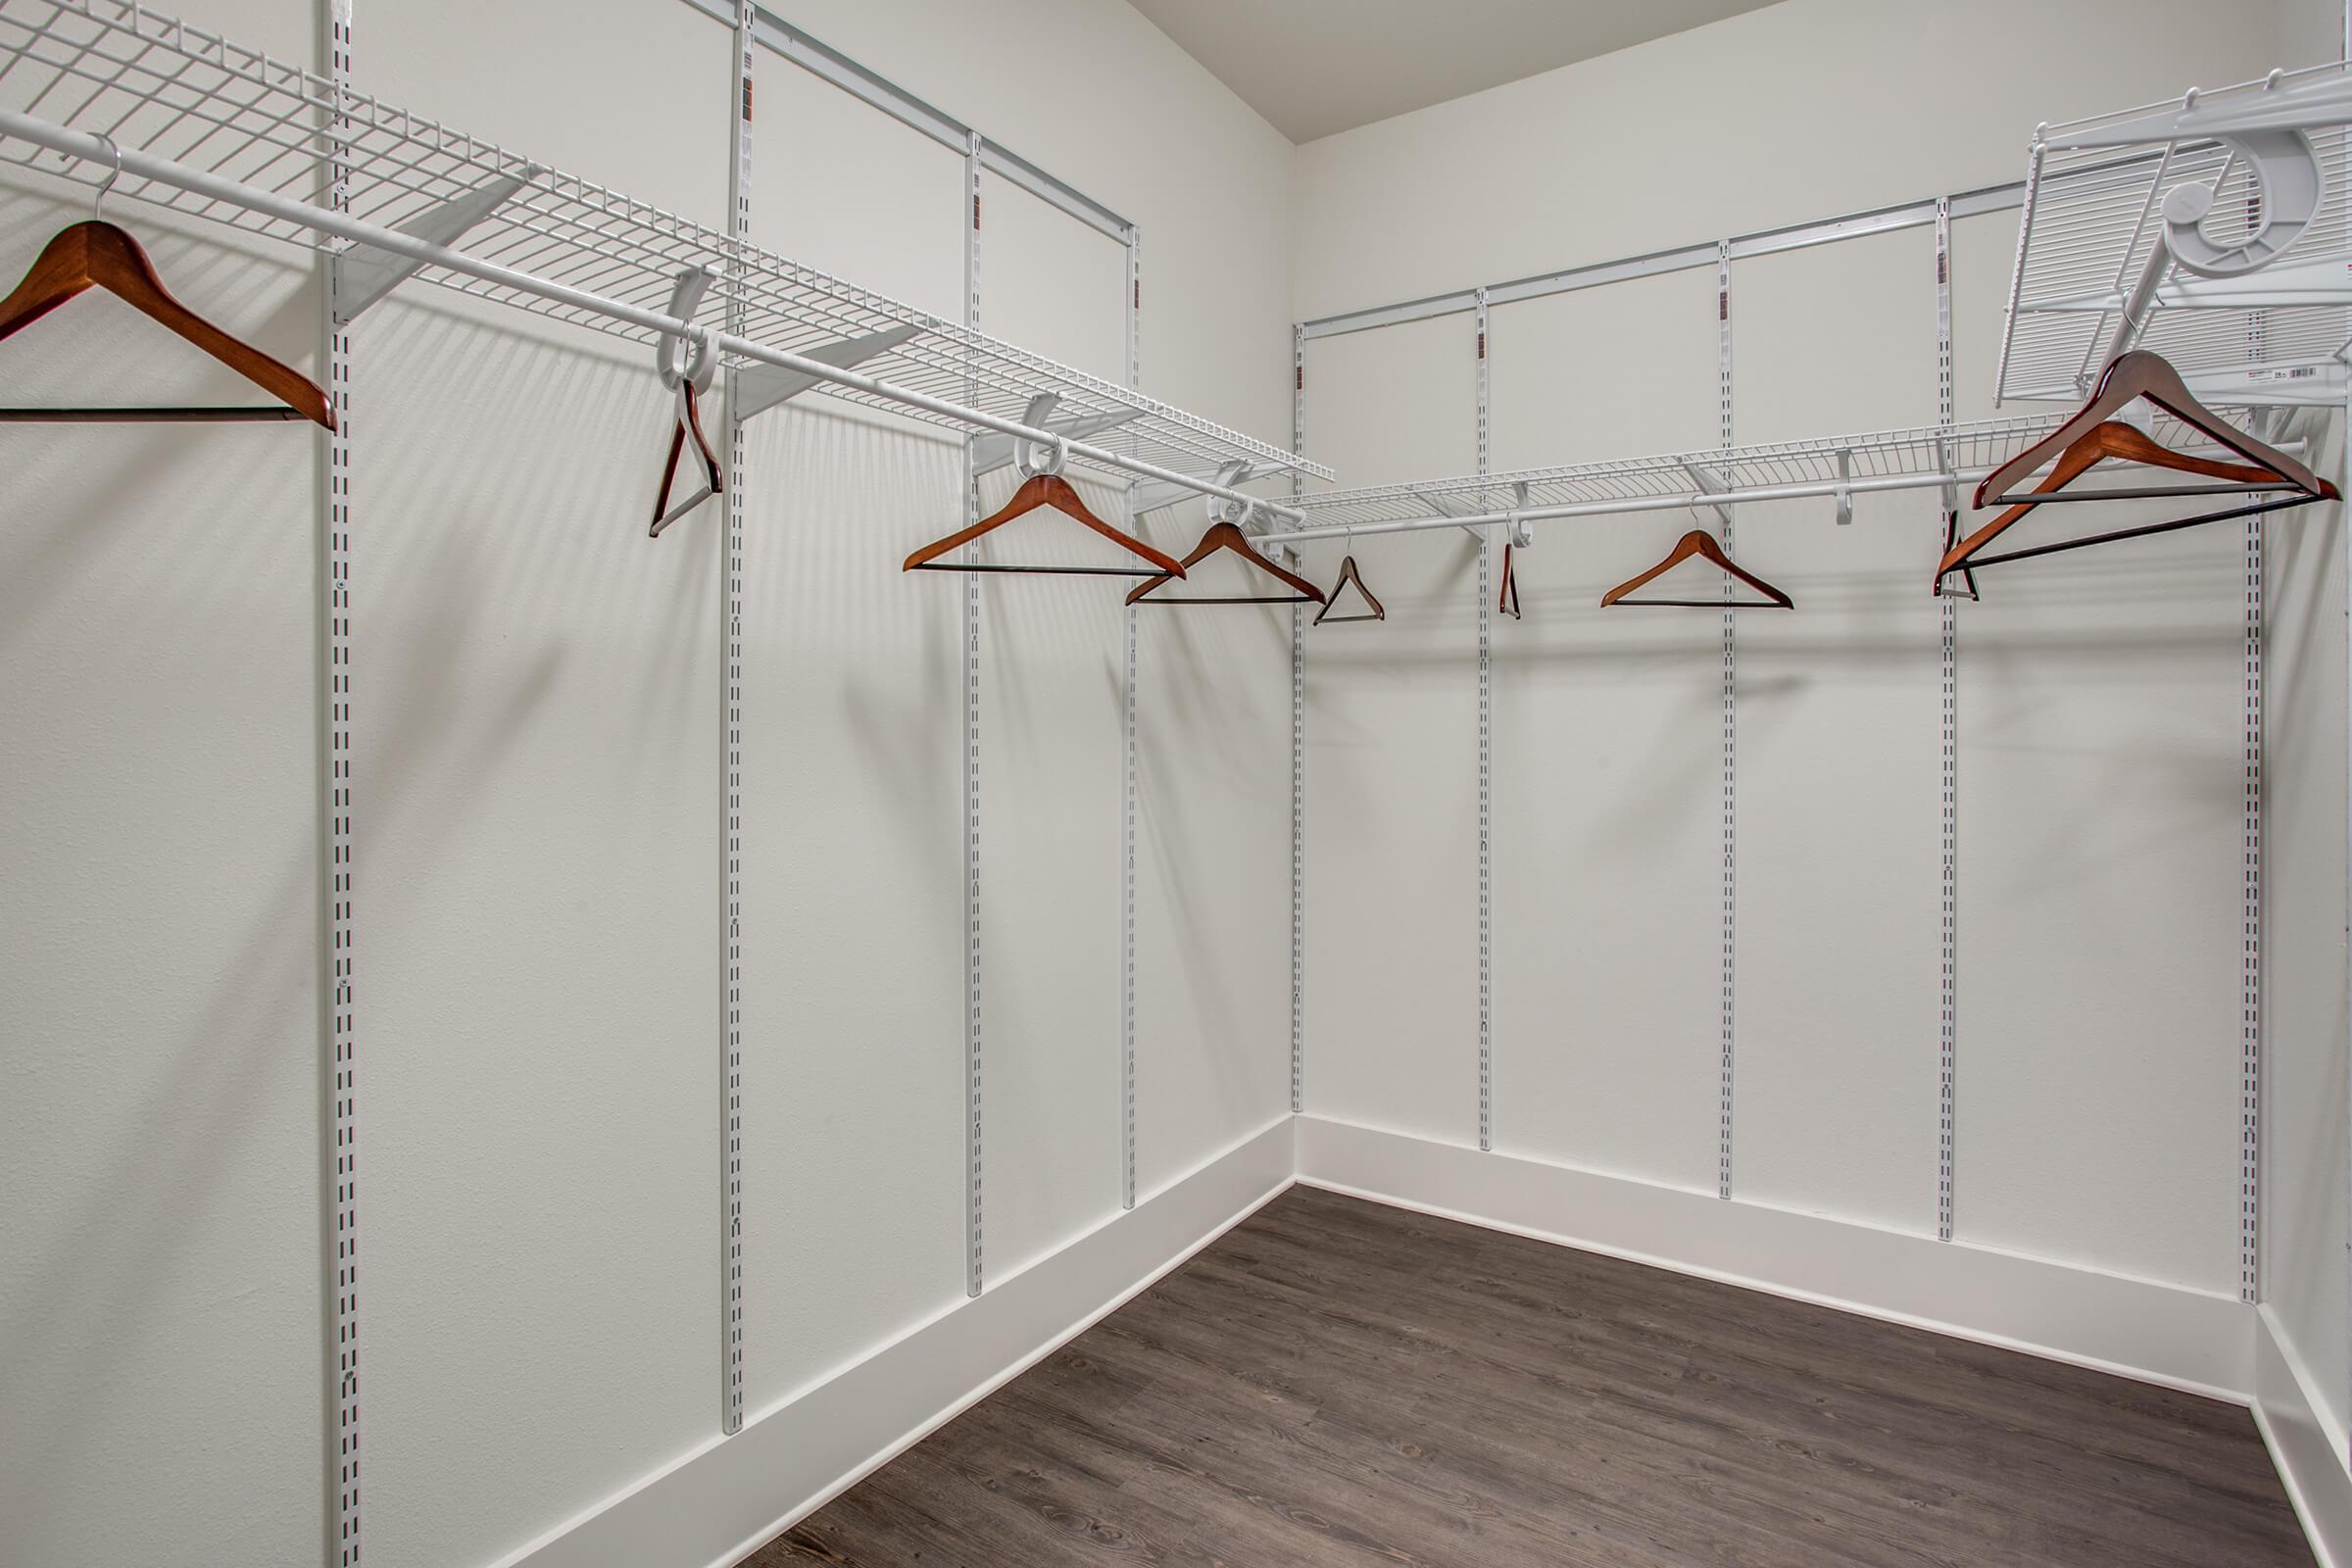 vacant walk-in closet with wooden floors